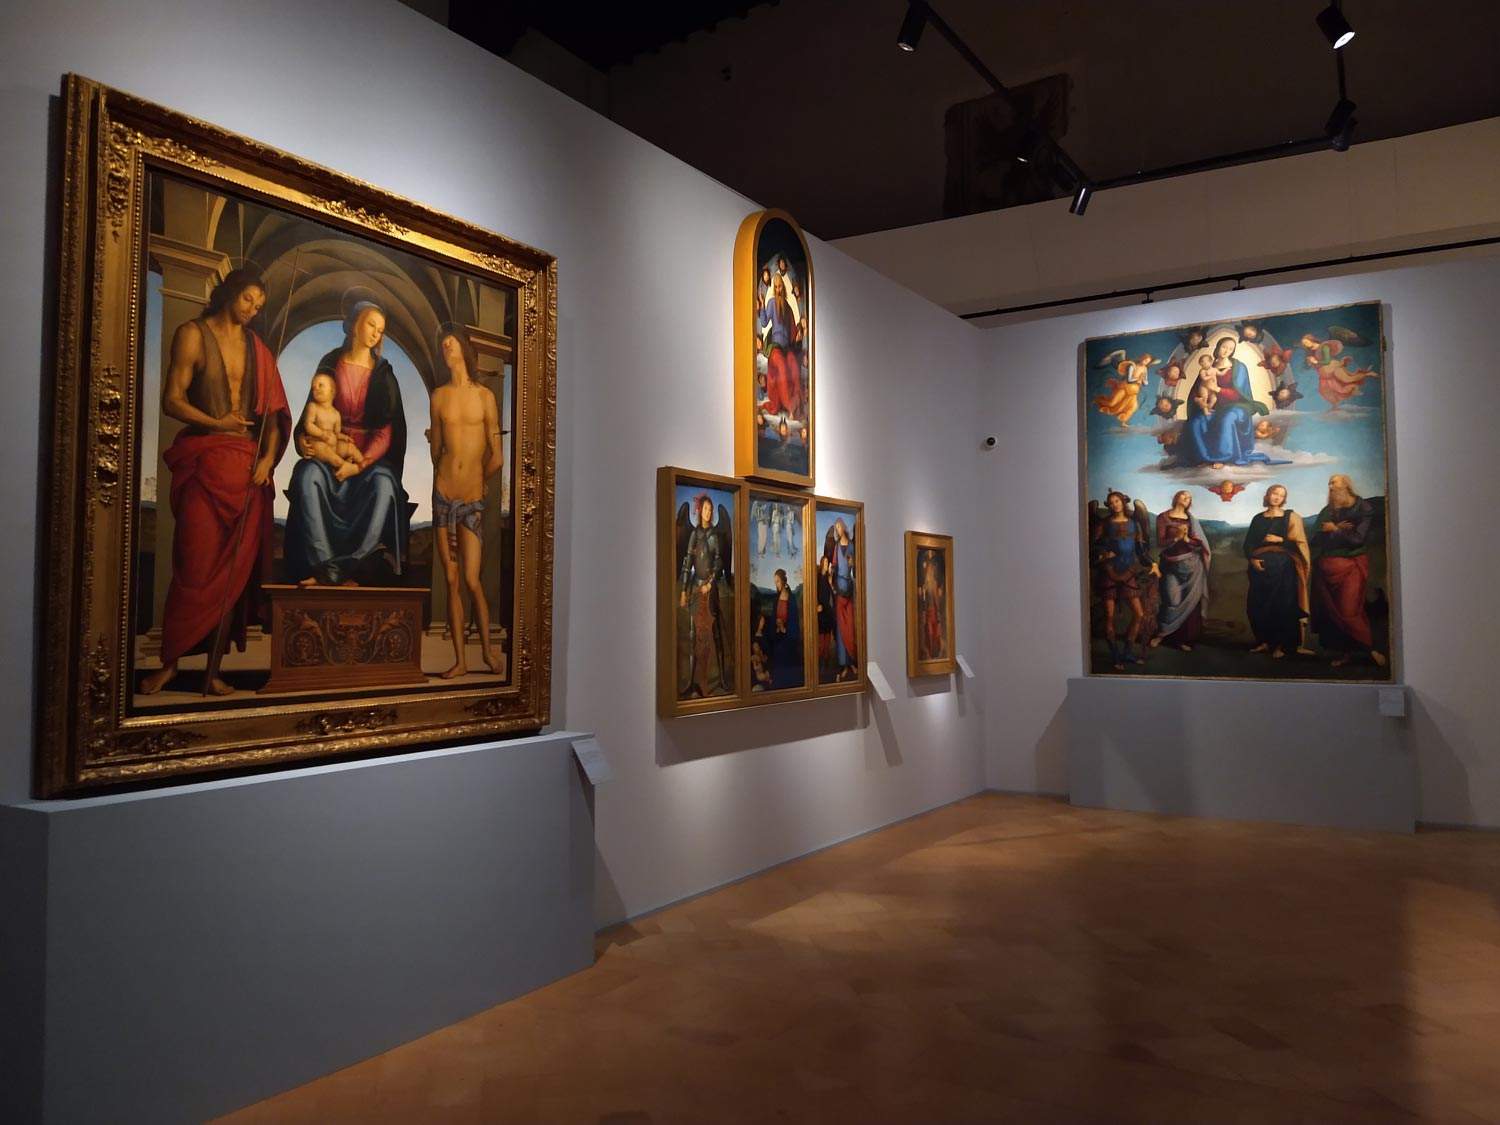 Great success for the Perugino exhibition. Over 100,000 visitors